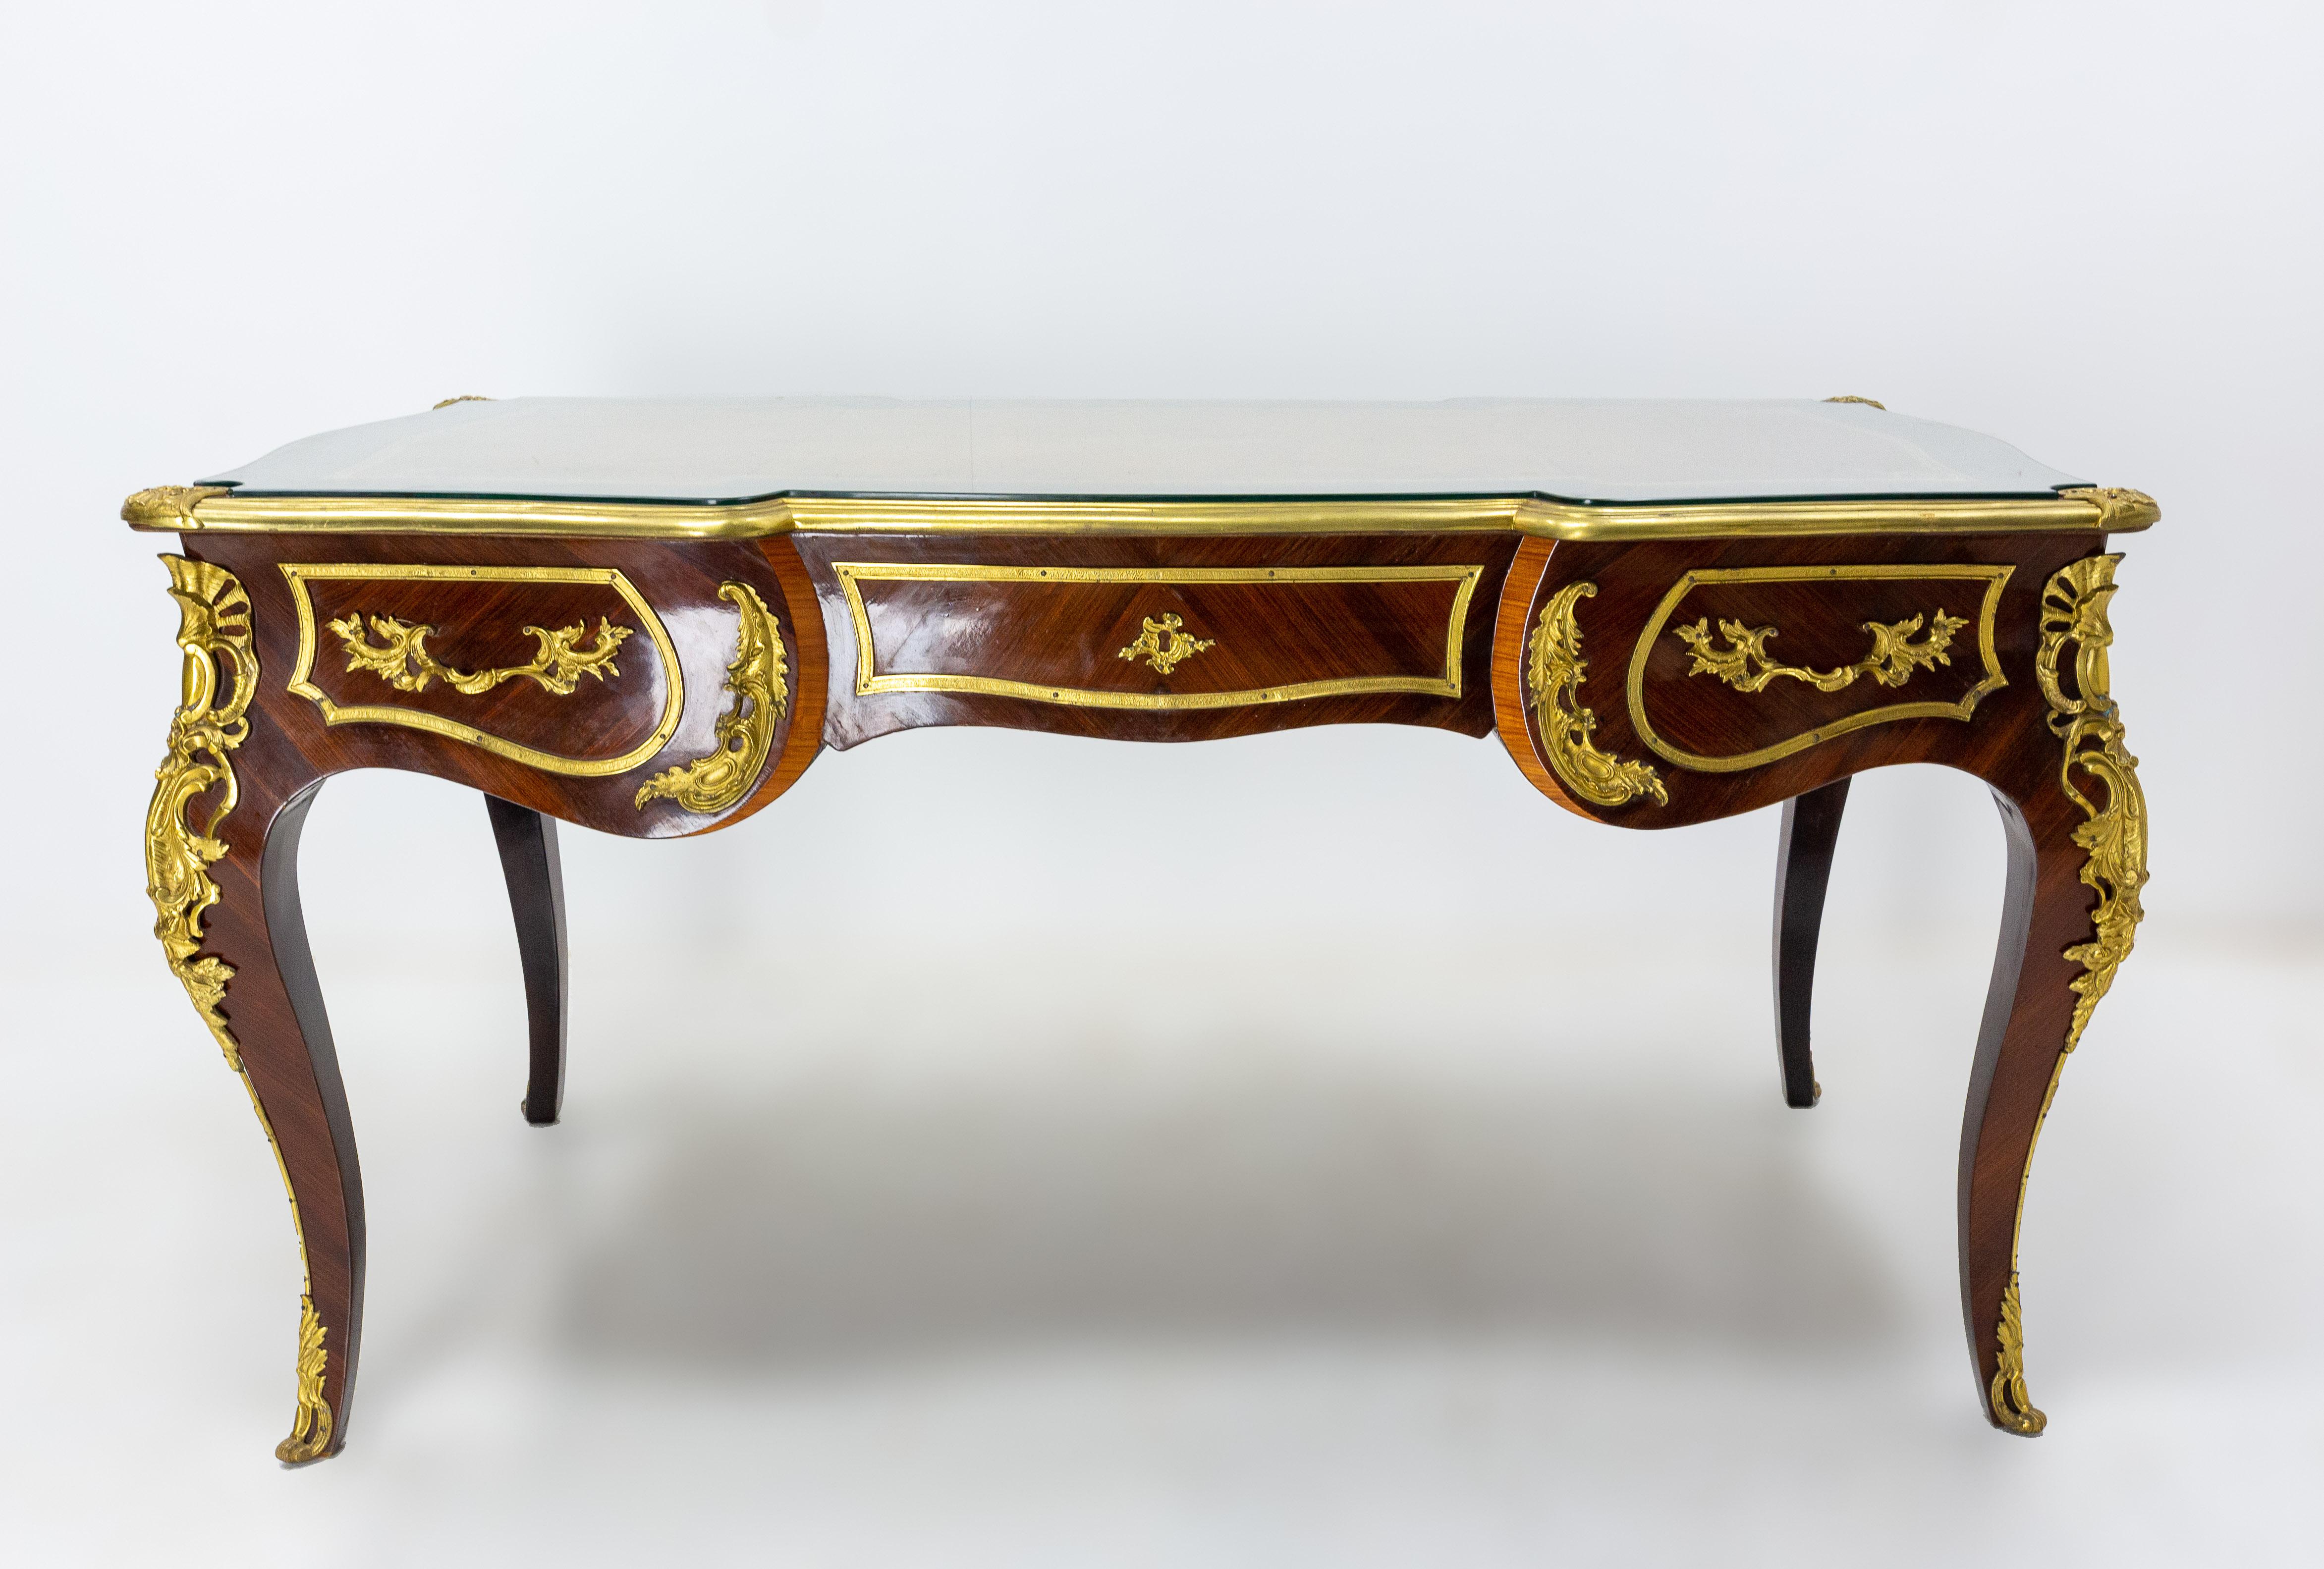 This writing table in the Louis XV style was made in France in the mid 20th century. The tray is protected by a glass, is in a excellent condition: the veneer and the leather adorned with a vegetal golden frieze are in perfect condition.
Gilded and